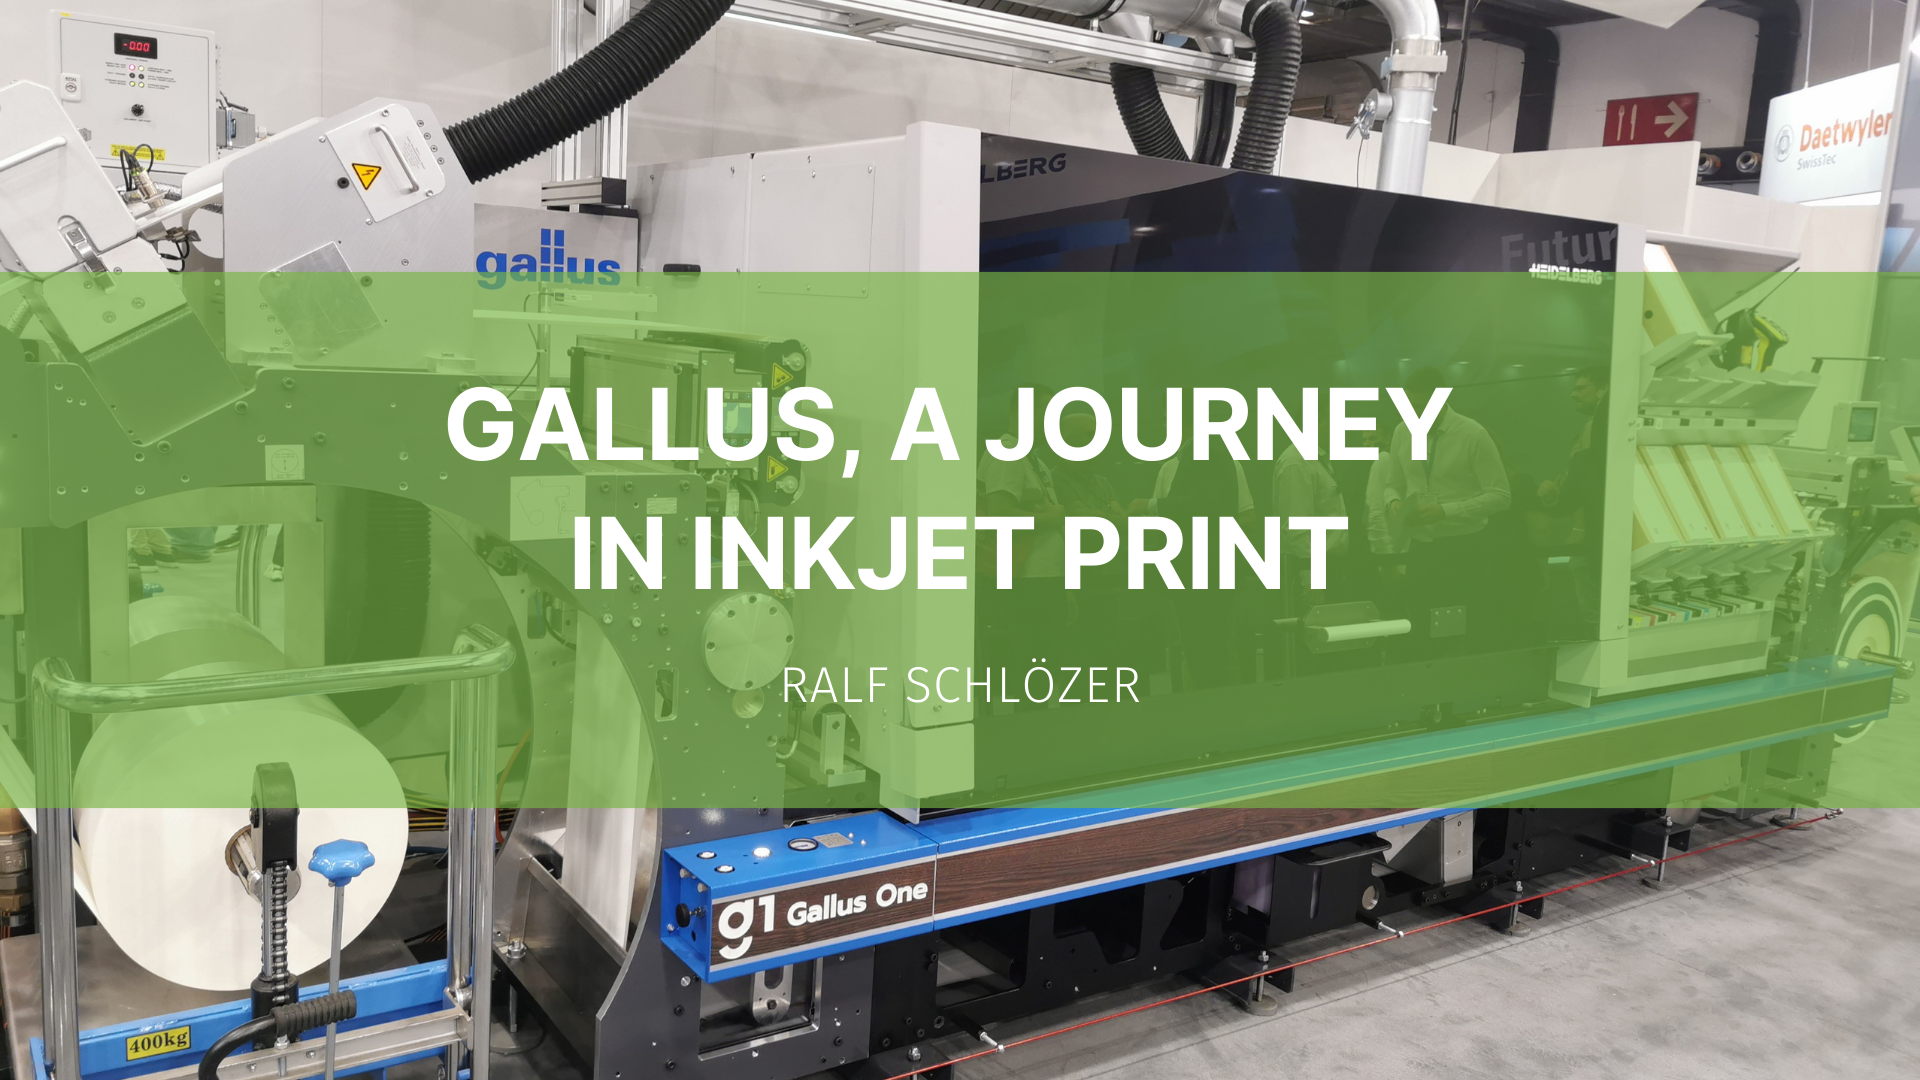 Featured image for “Gallus, a journey in Inkjet print”